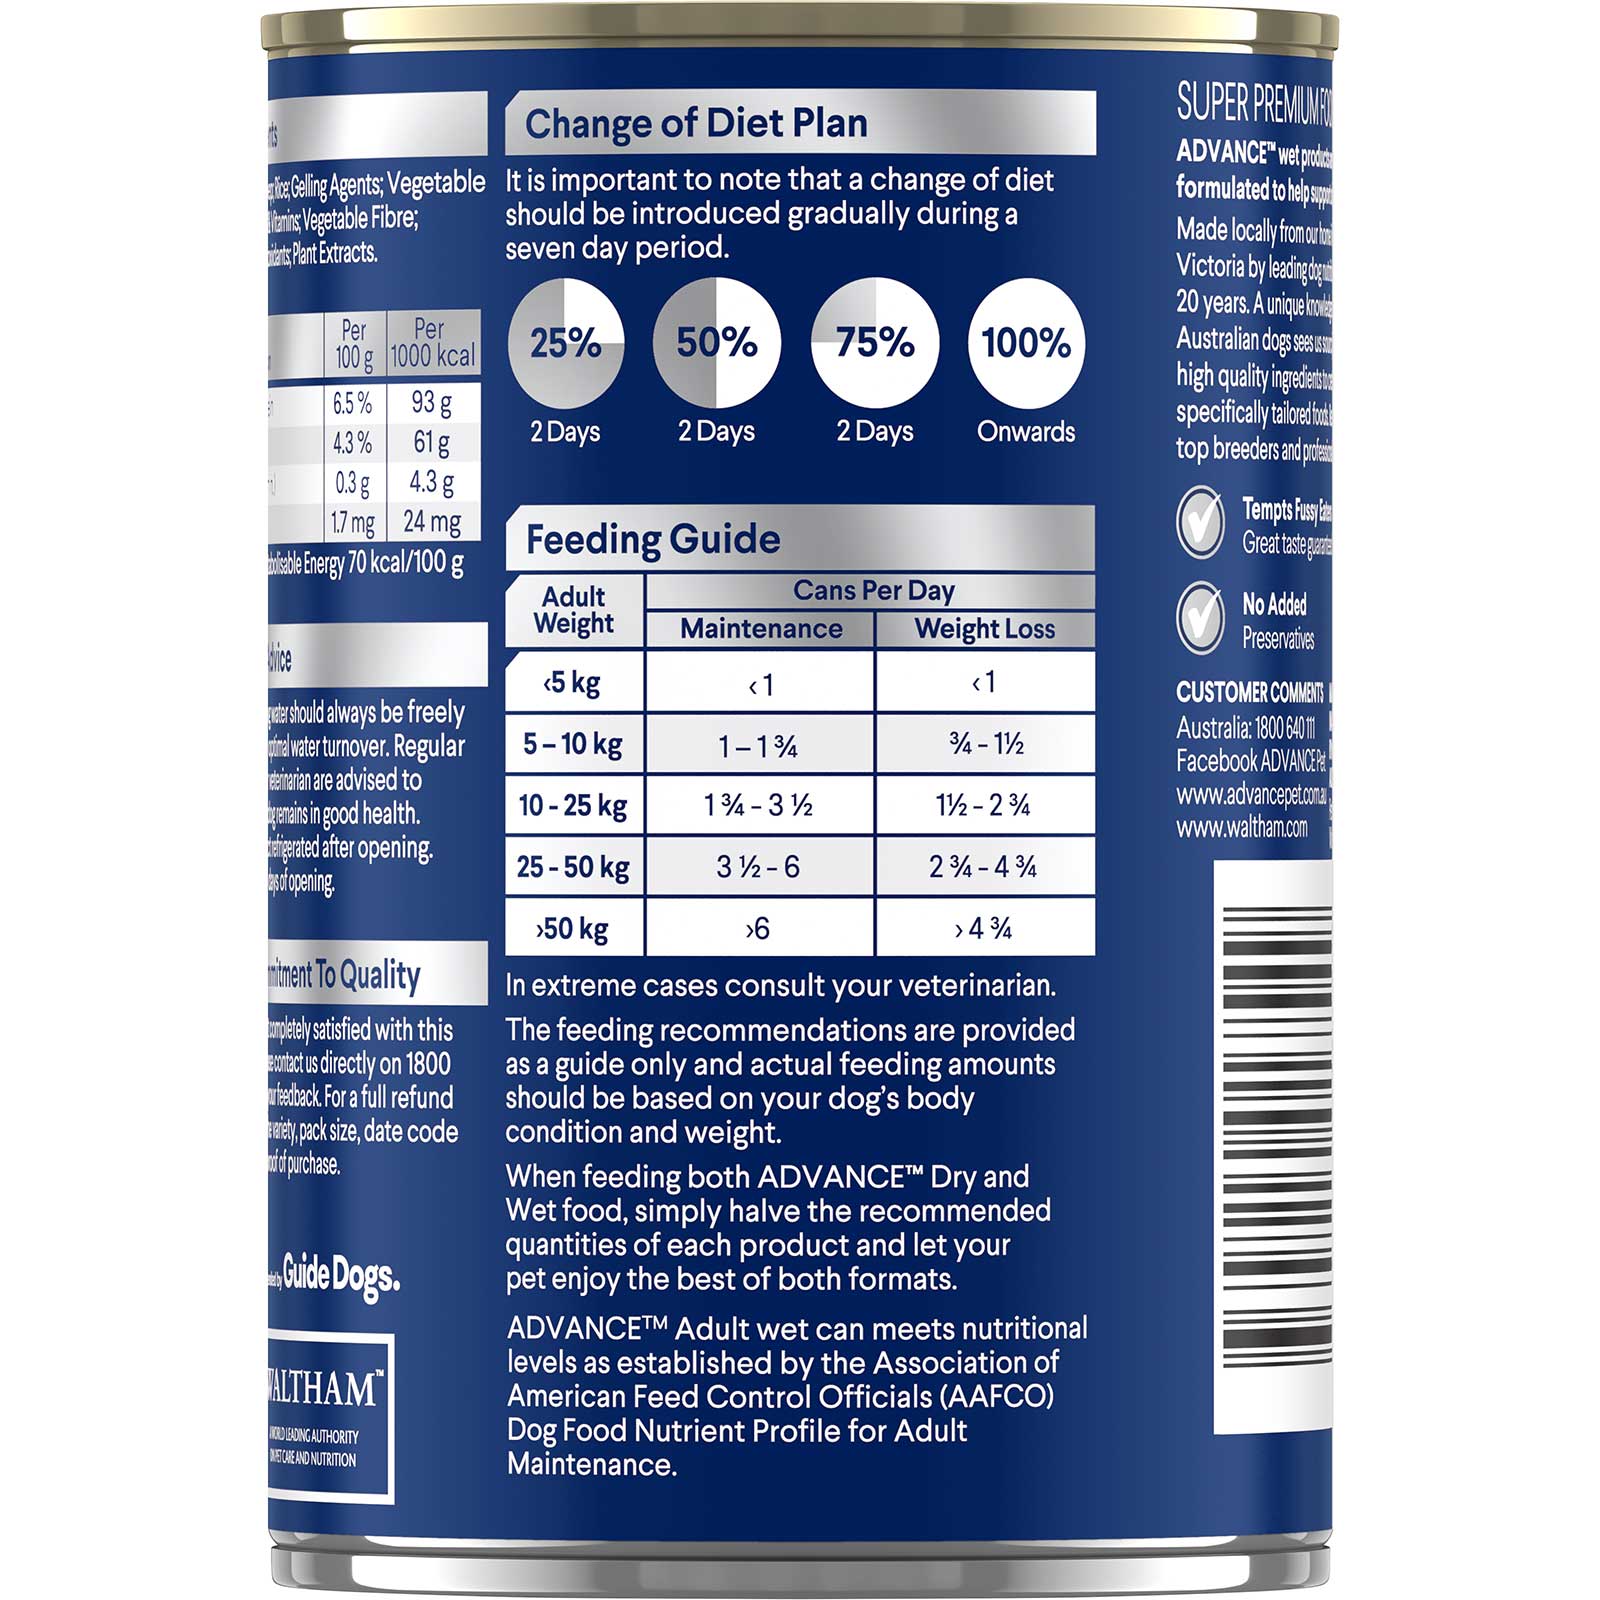 Advance Dog Food Can Adult Healthy Weight Chicken with Rice